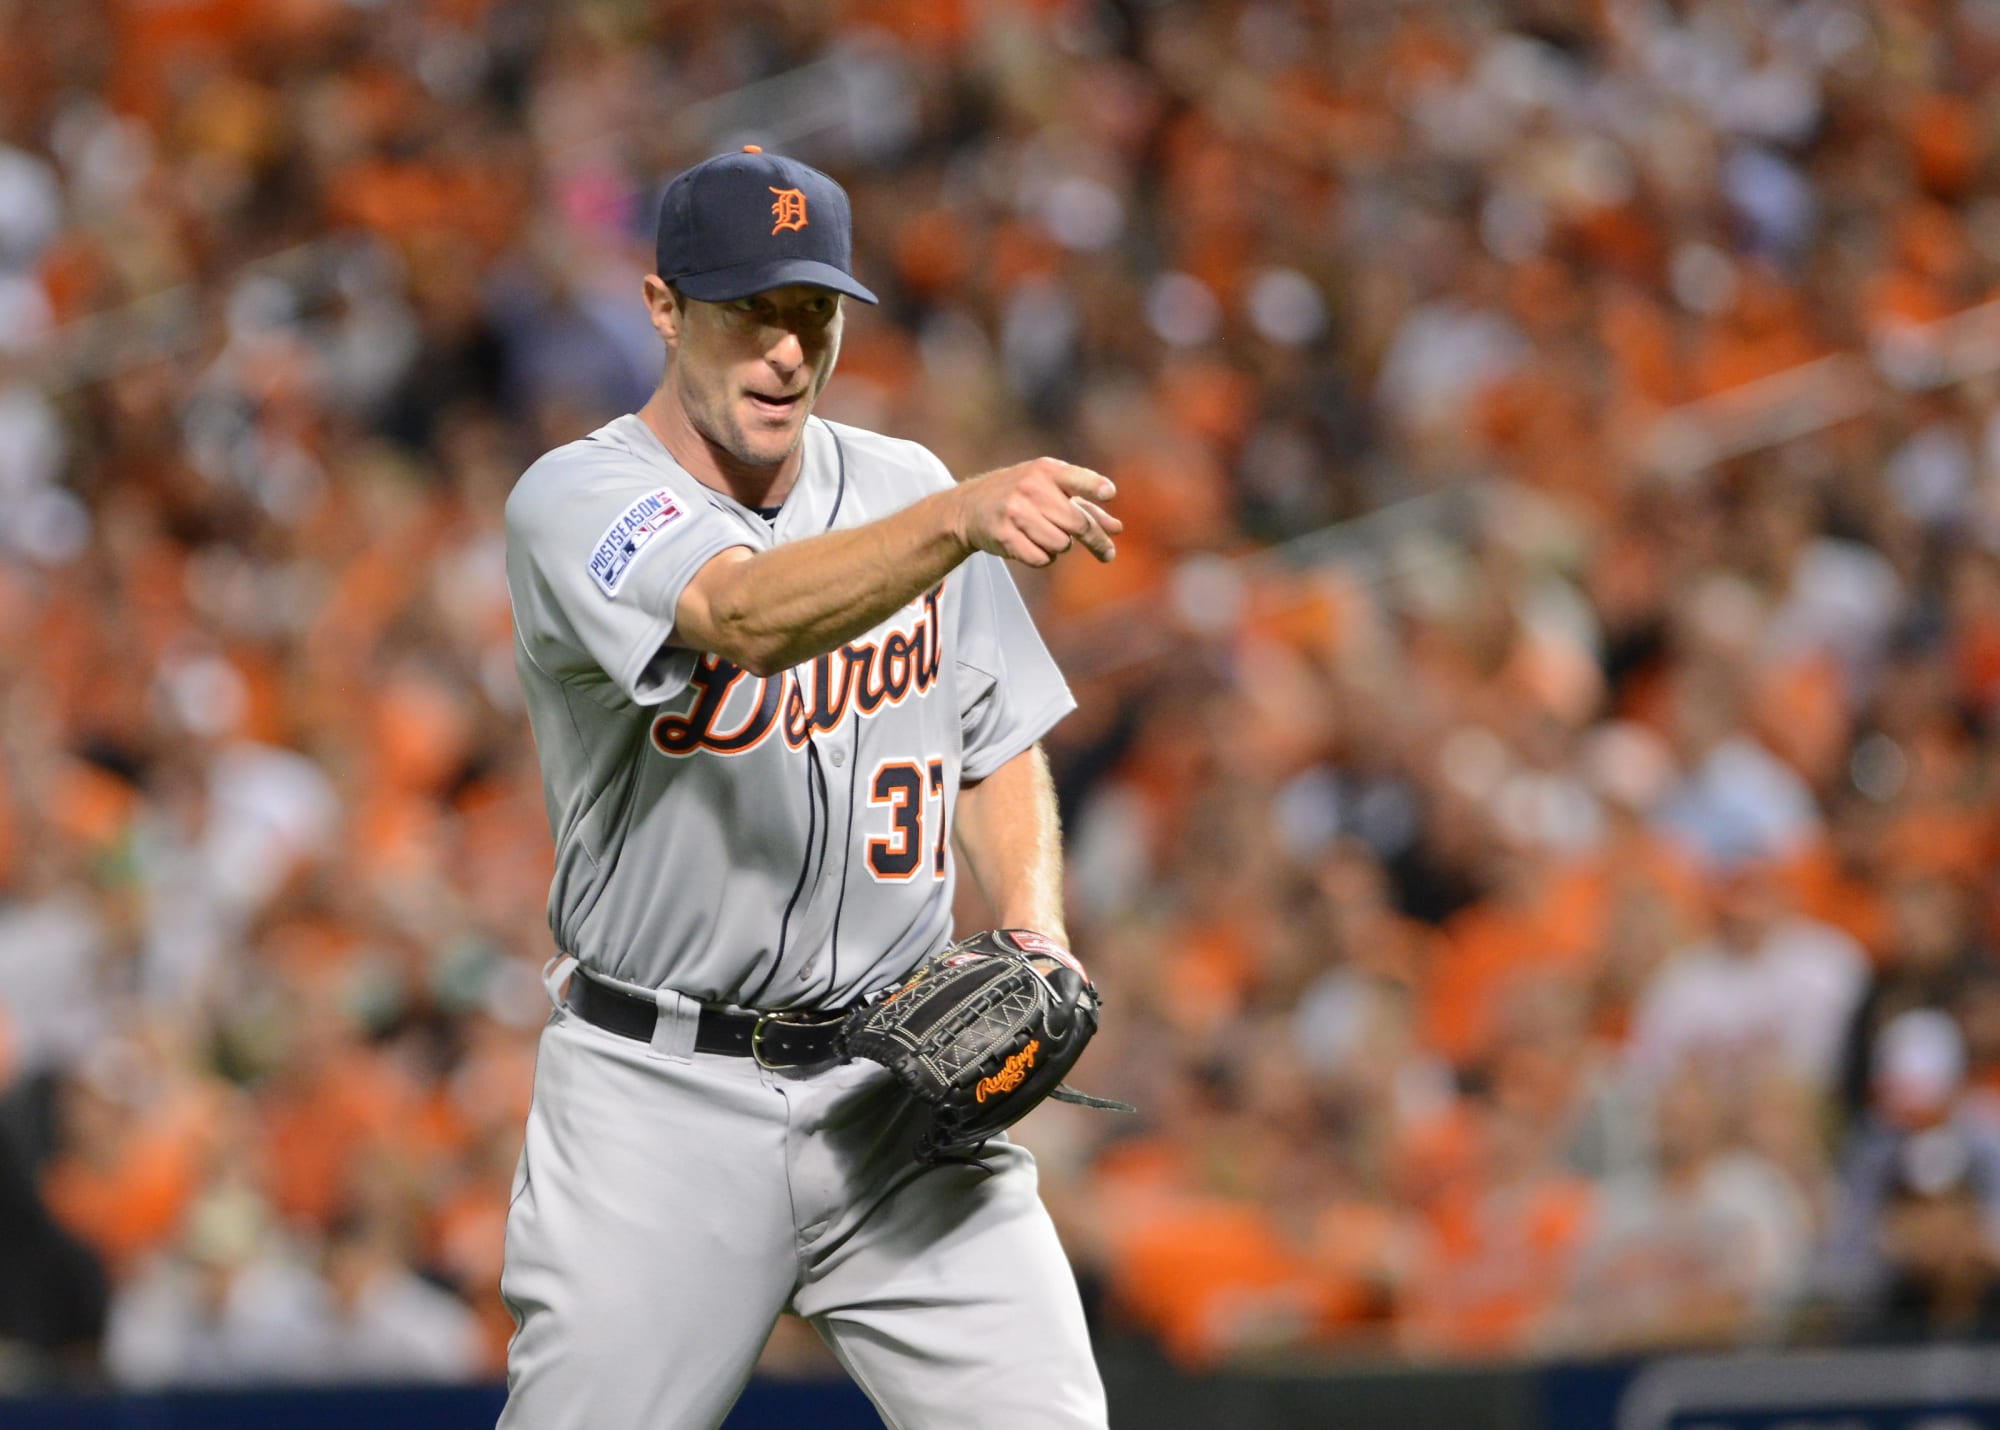 Detroit Tigers' Max Scherzer opens up about death of brother, his